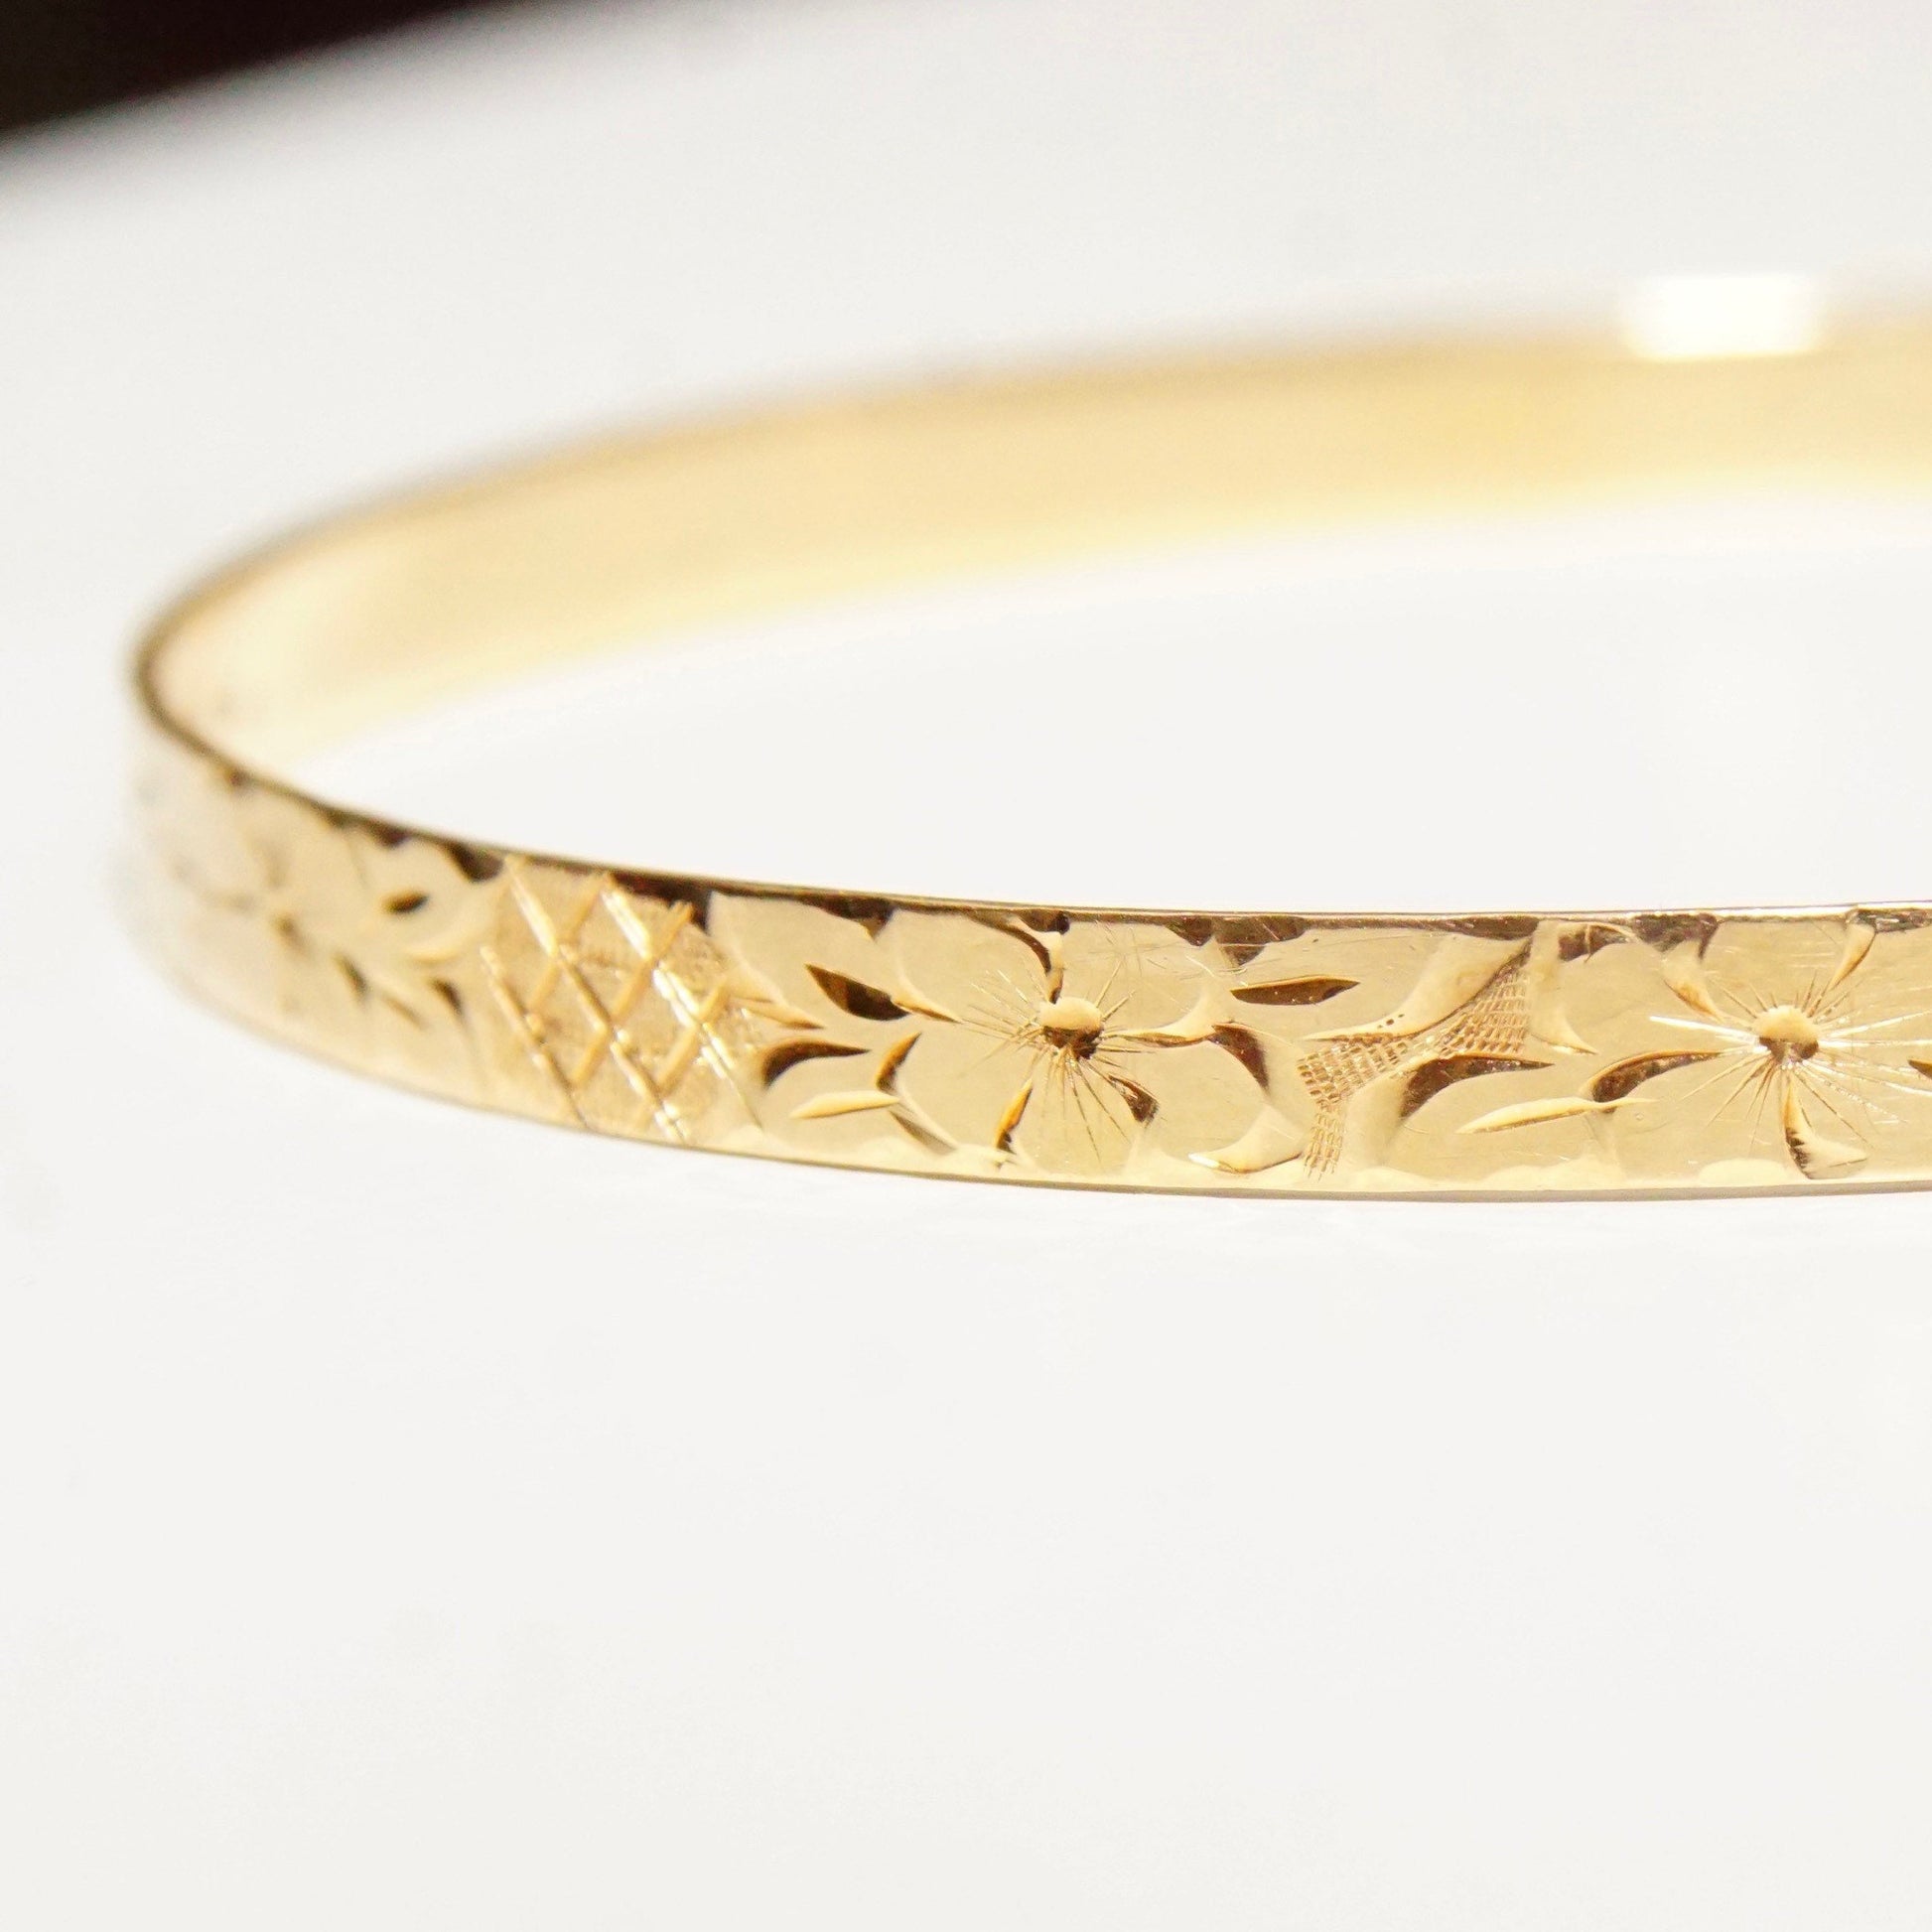 14K solid yellow gold bangle bracelet with diamond-cut floral motif designs, 5mm wide, ideal for stacking